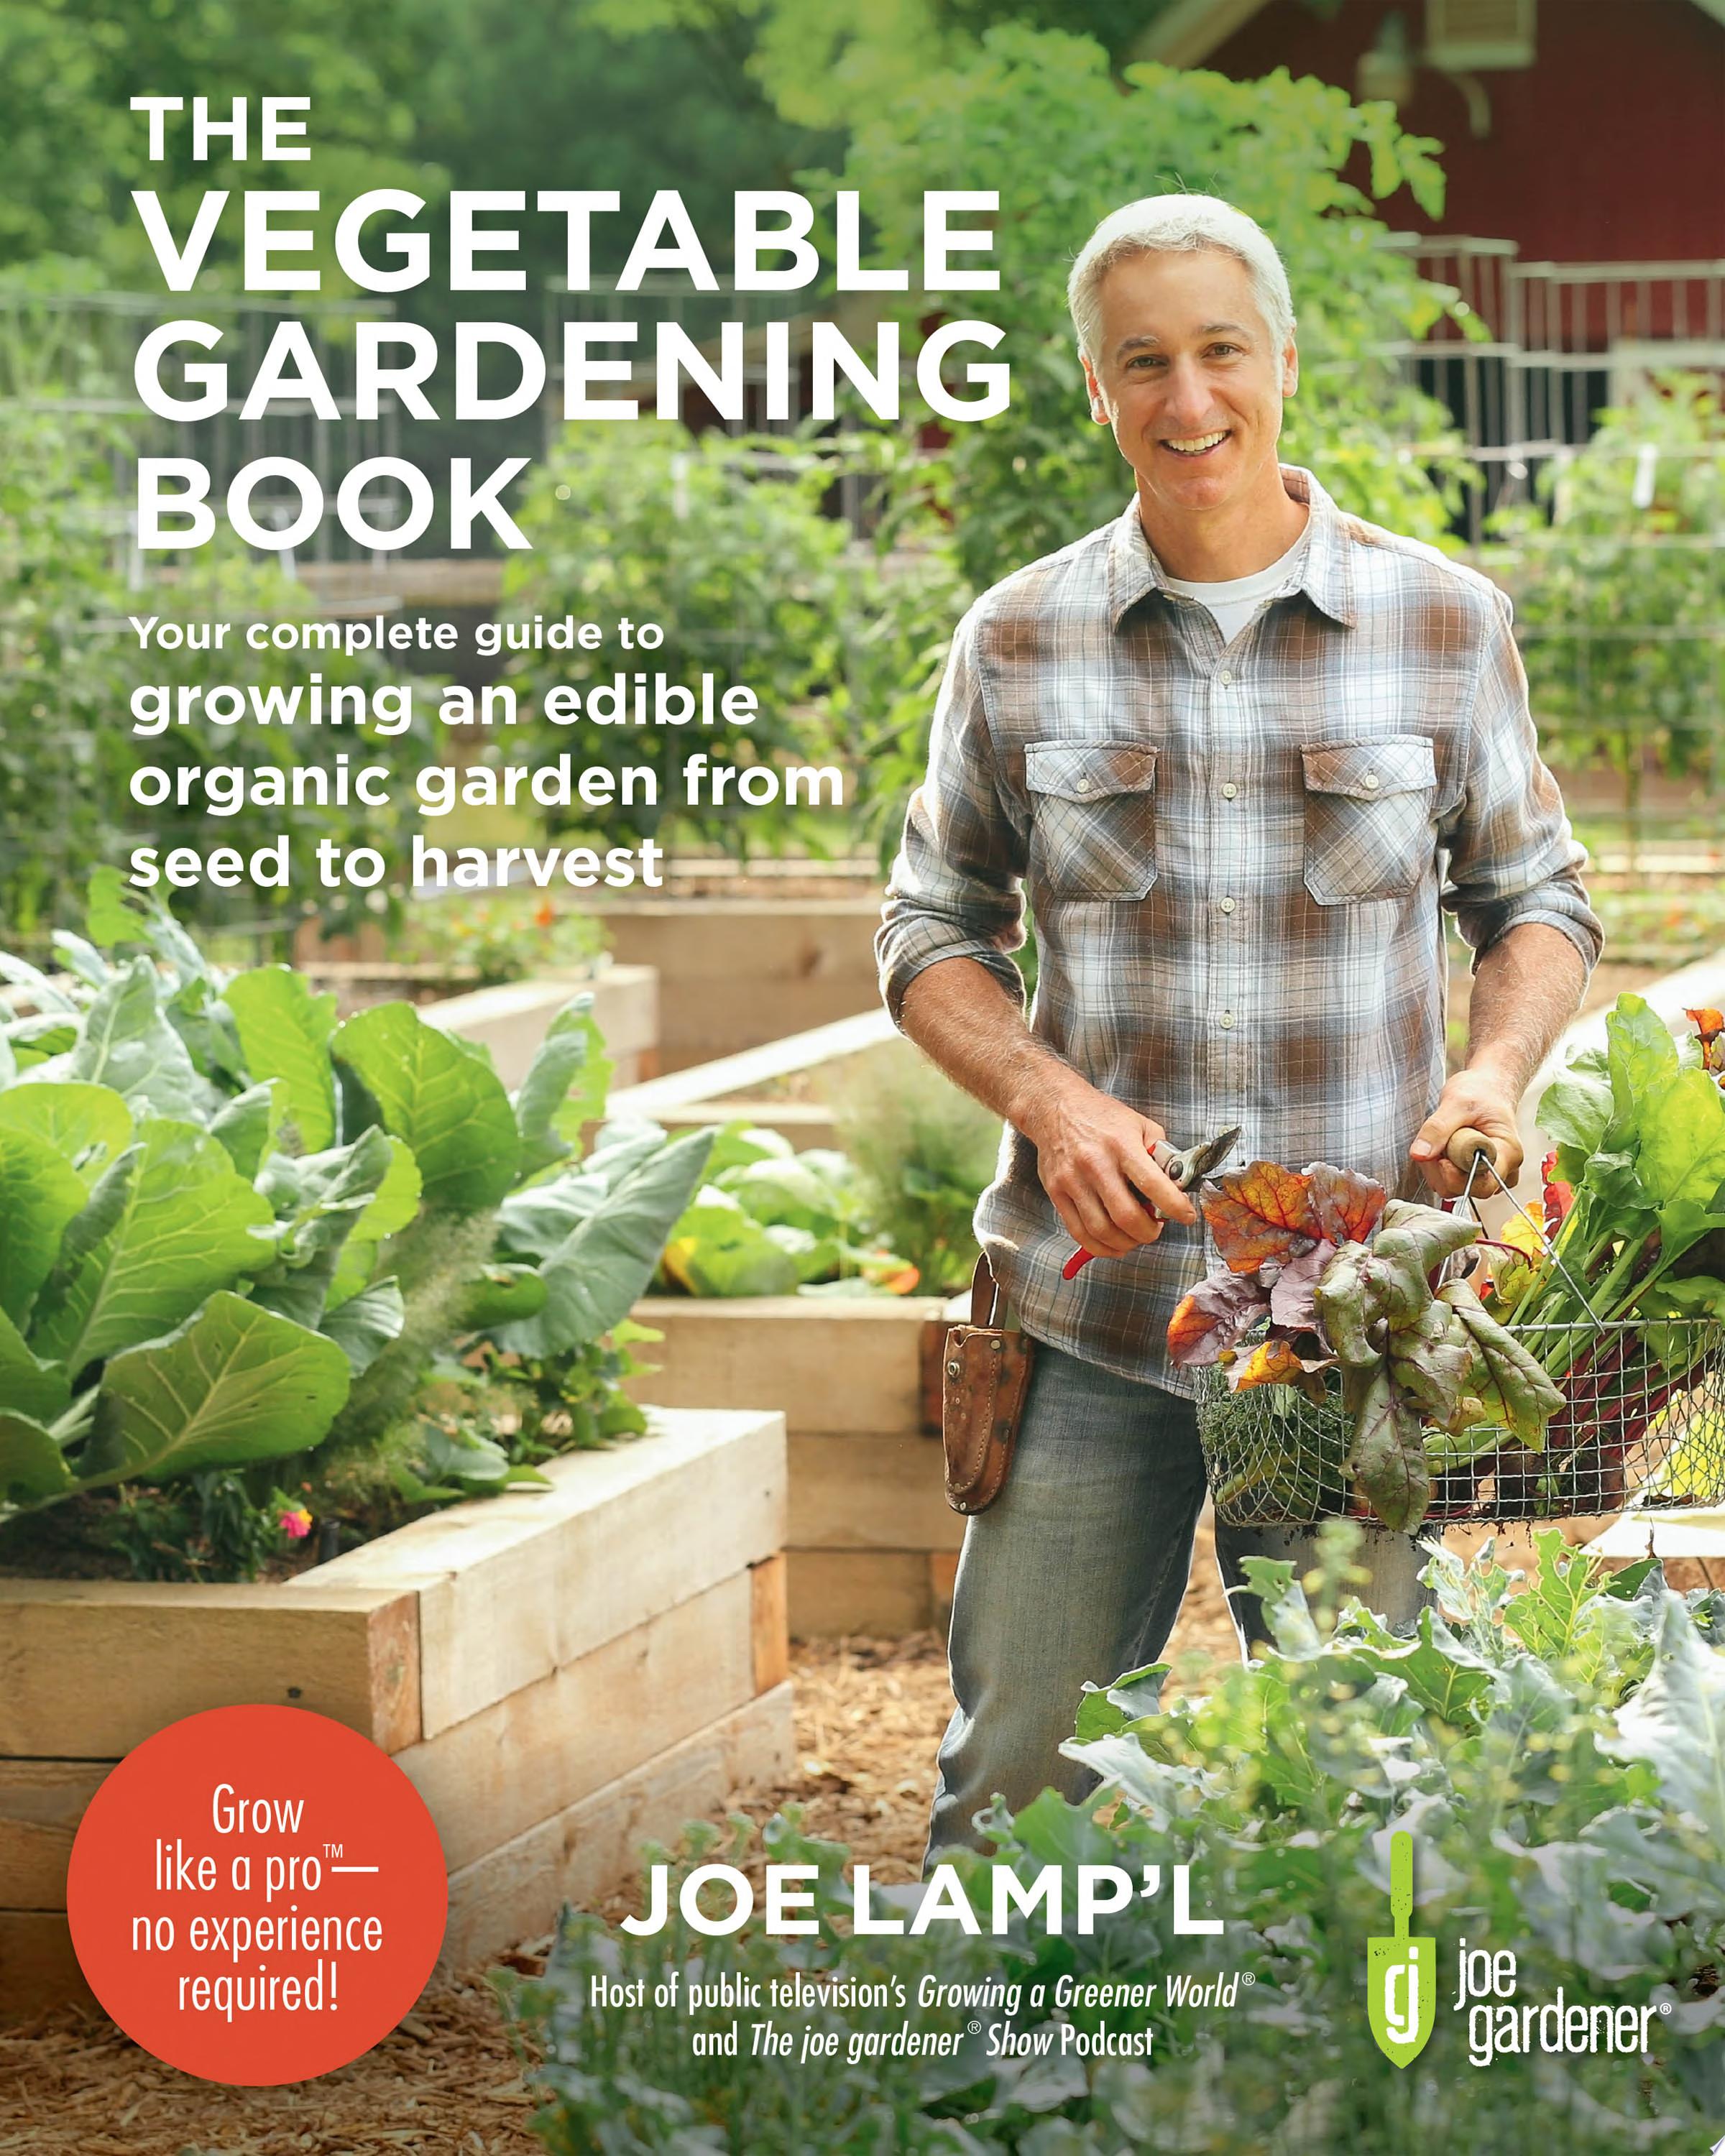 Image for "The Vegetable Gardening Book"